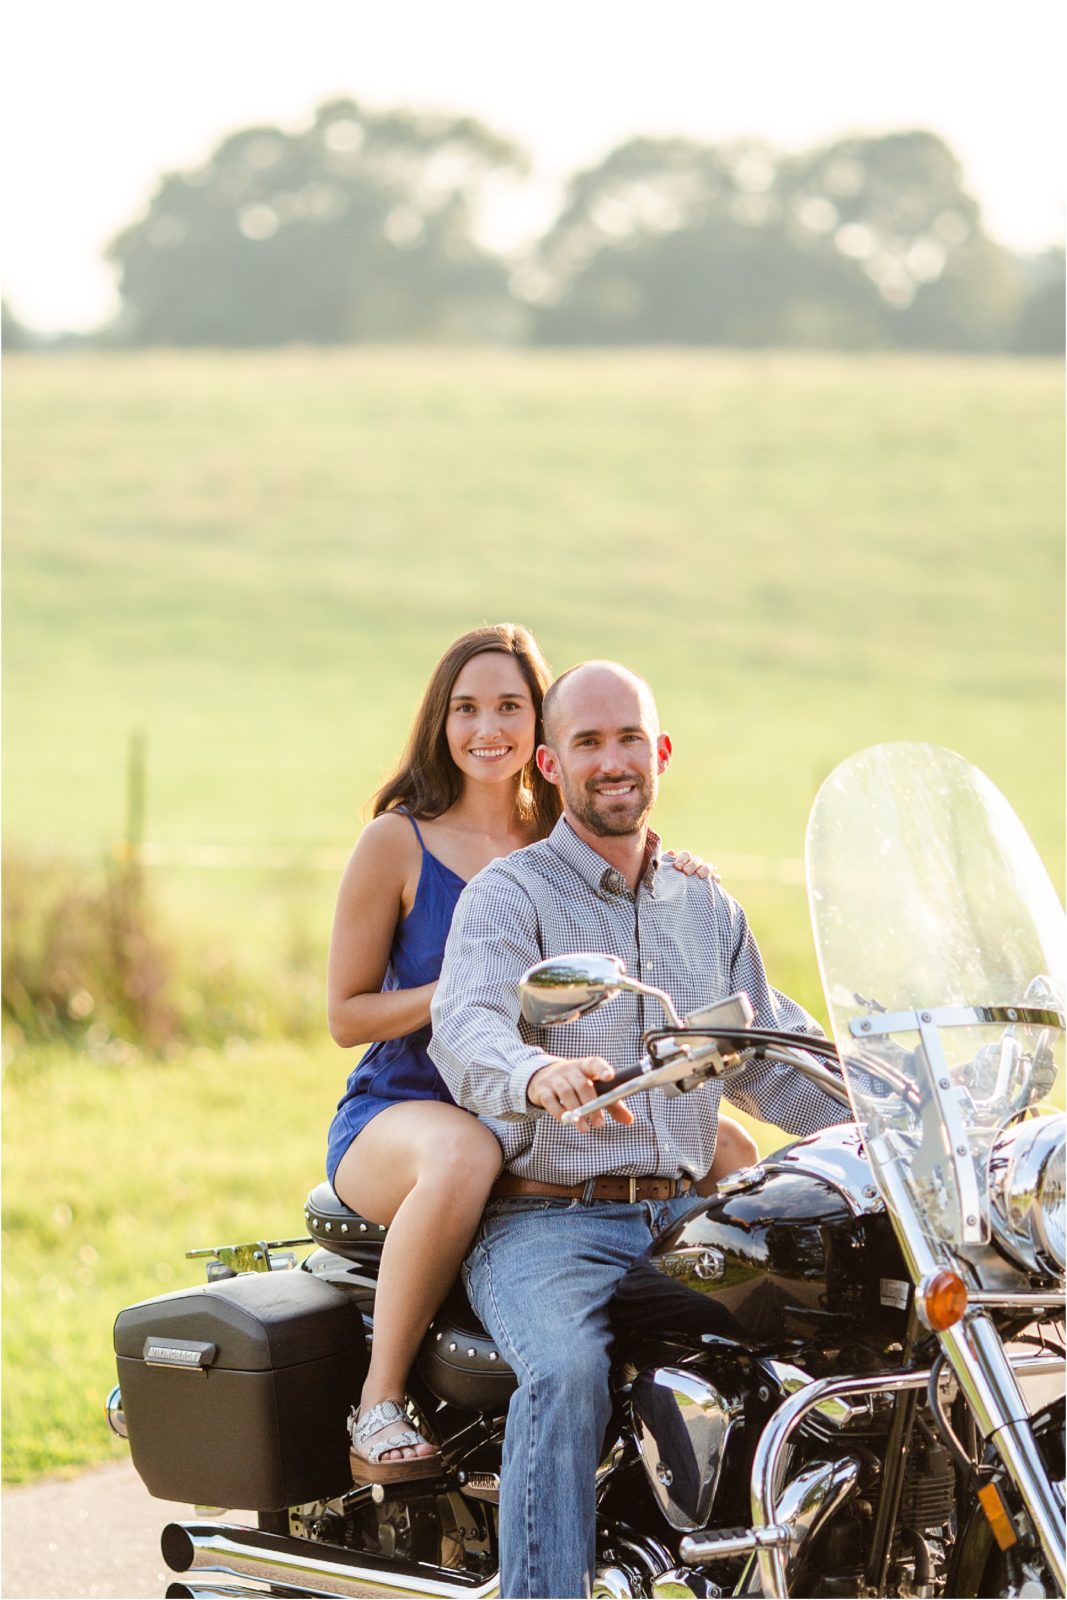 Couple taking engagement pictures on motorcycle